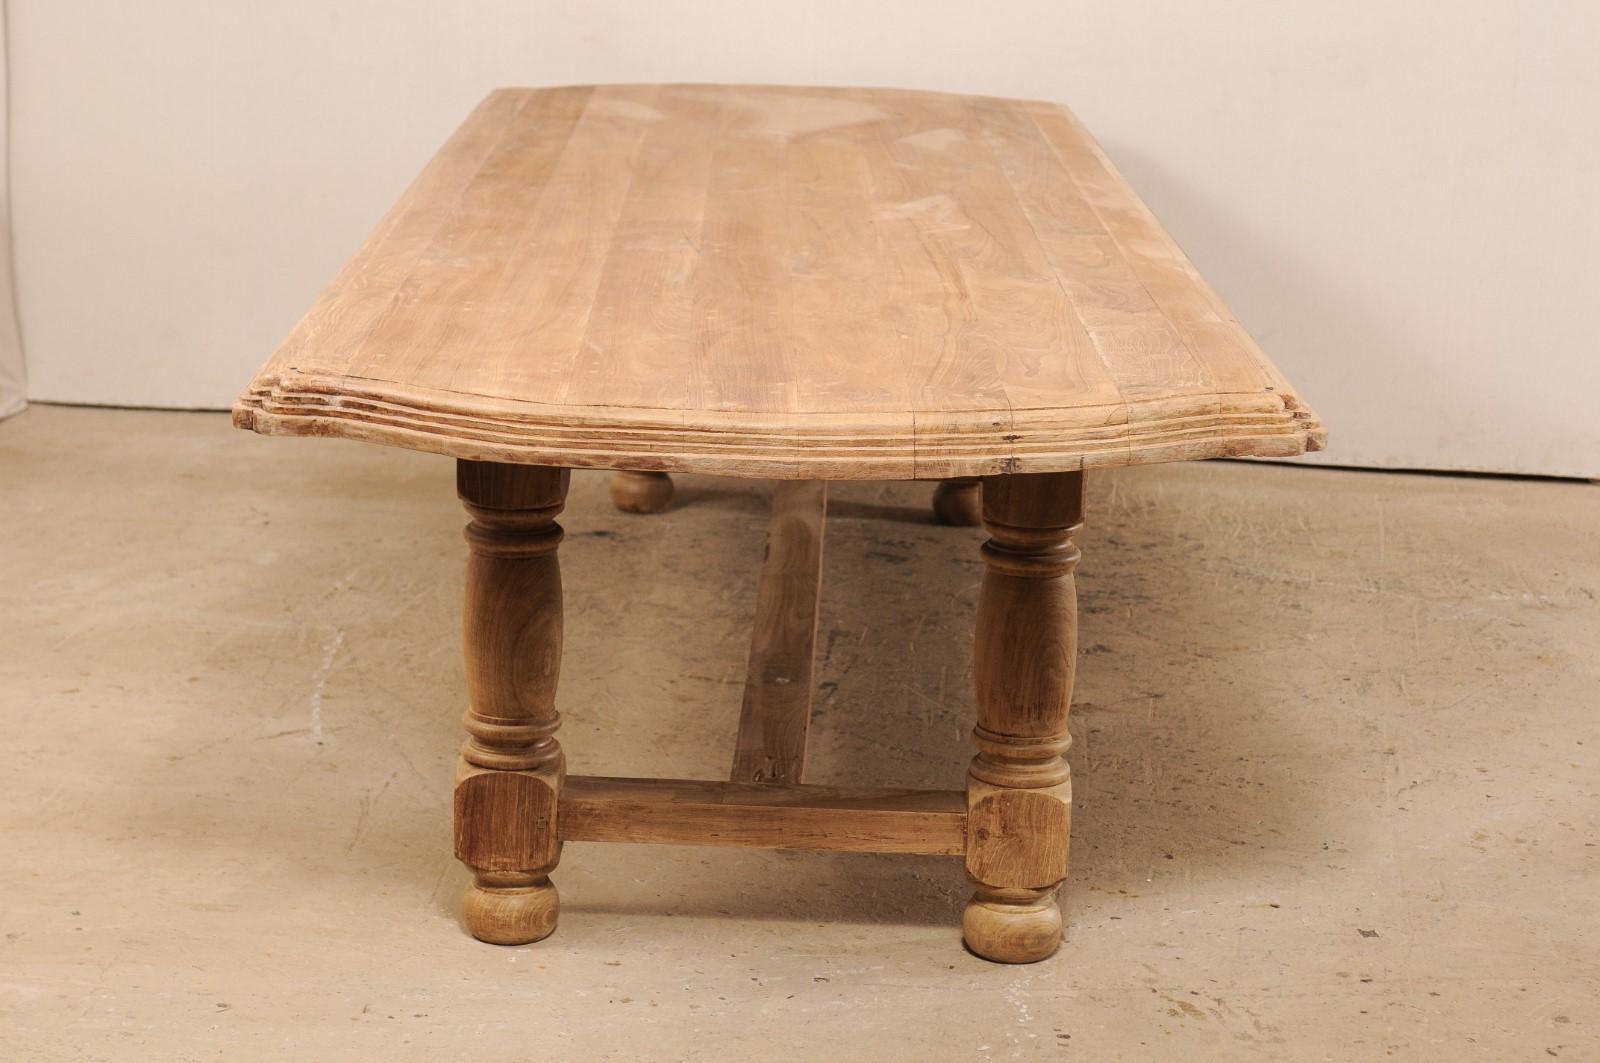 A 19th C. Anglo-Indian Light Teak Wood Dining Table w/Robust Legs, 11+ Ft Long 3